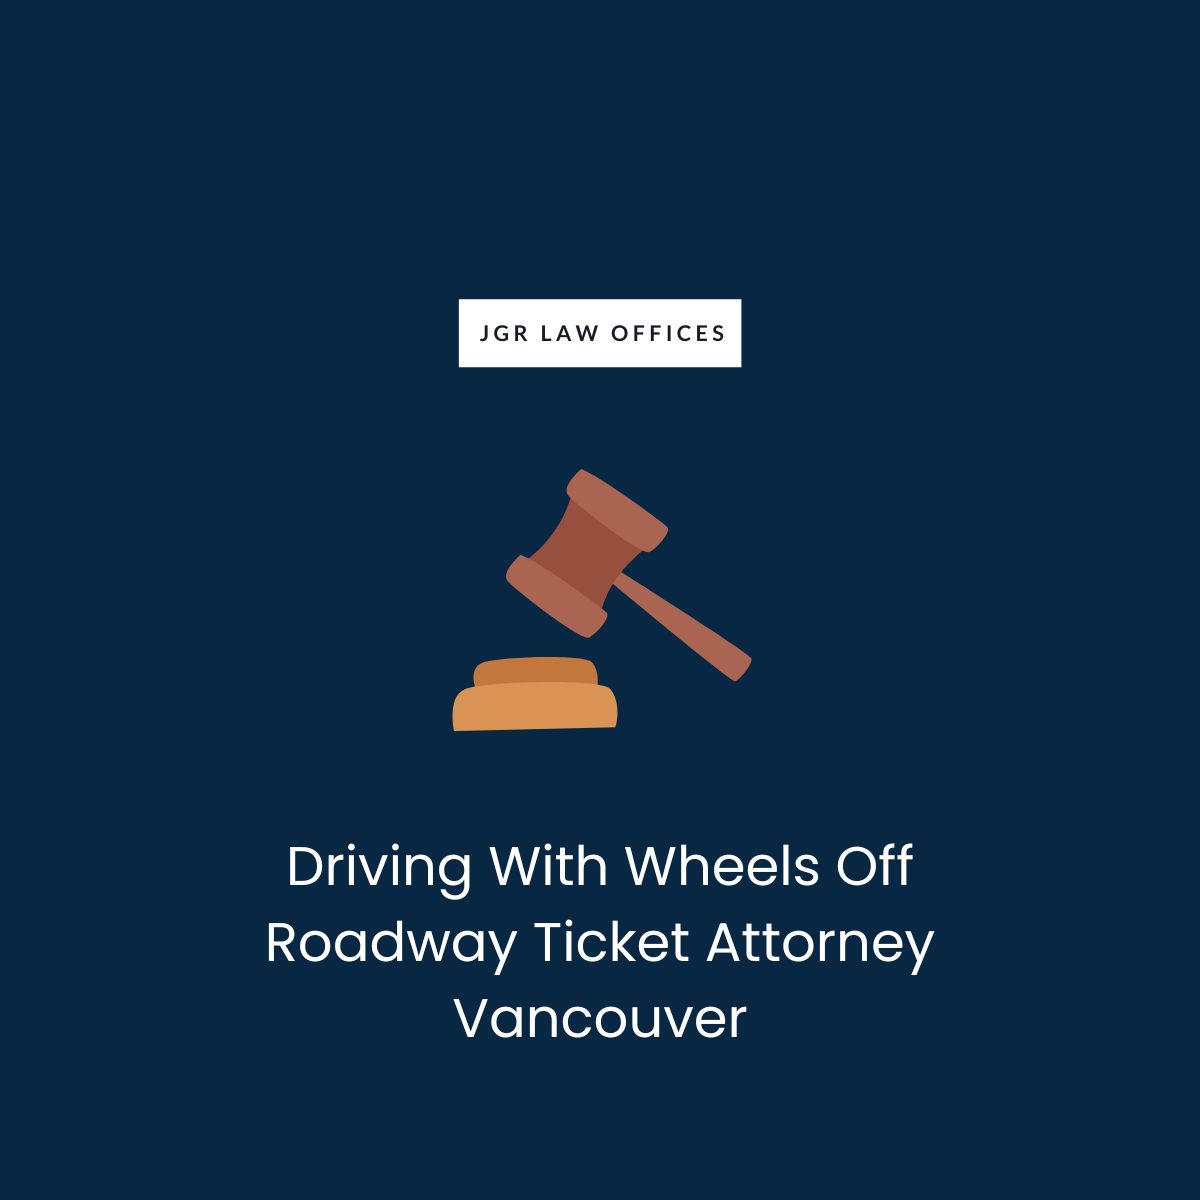 Driving With Wheels Off Roadway Ticket Attorney Vancouver